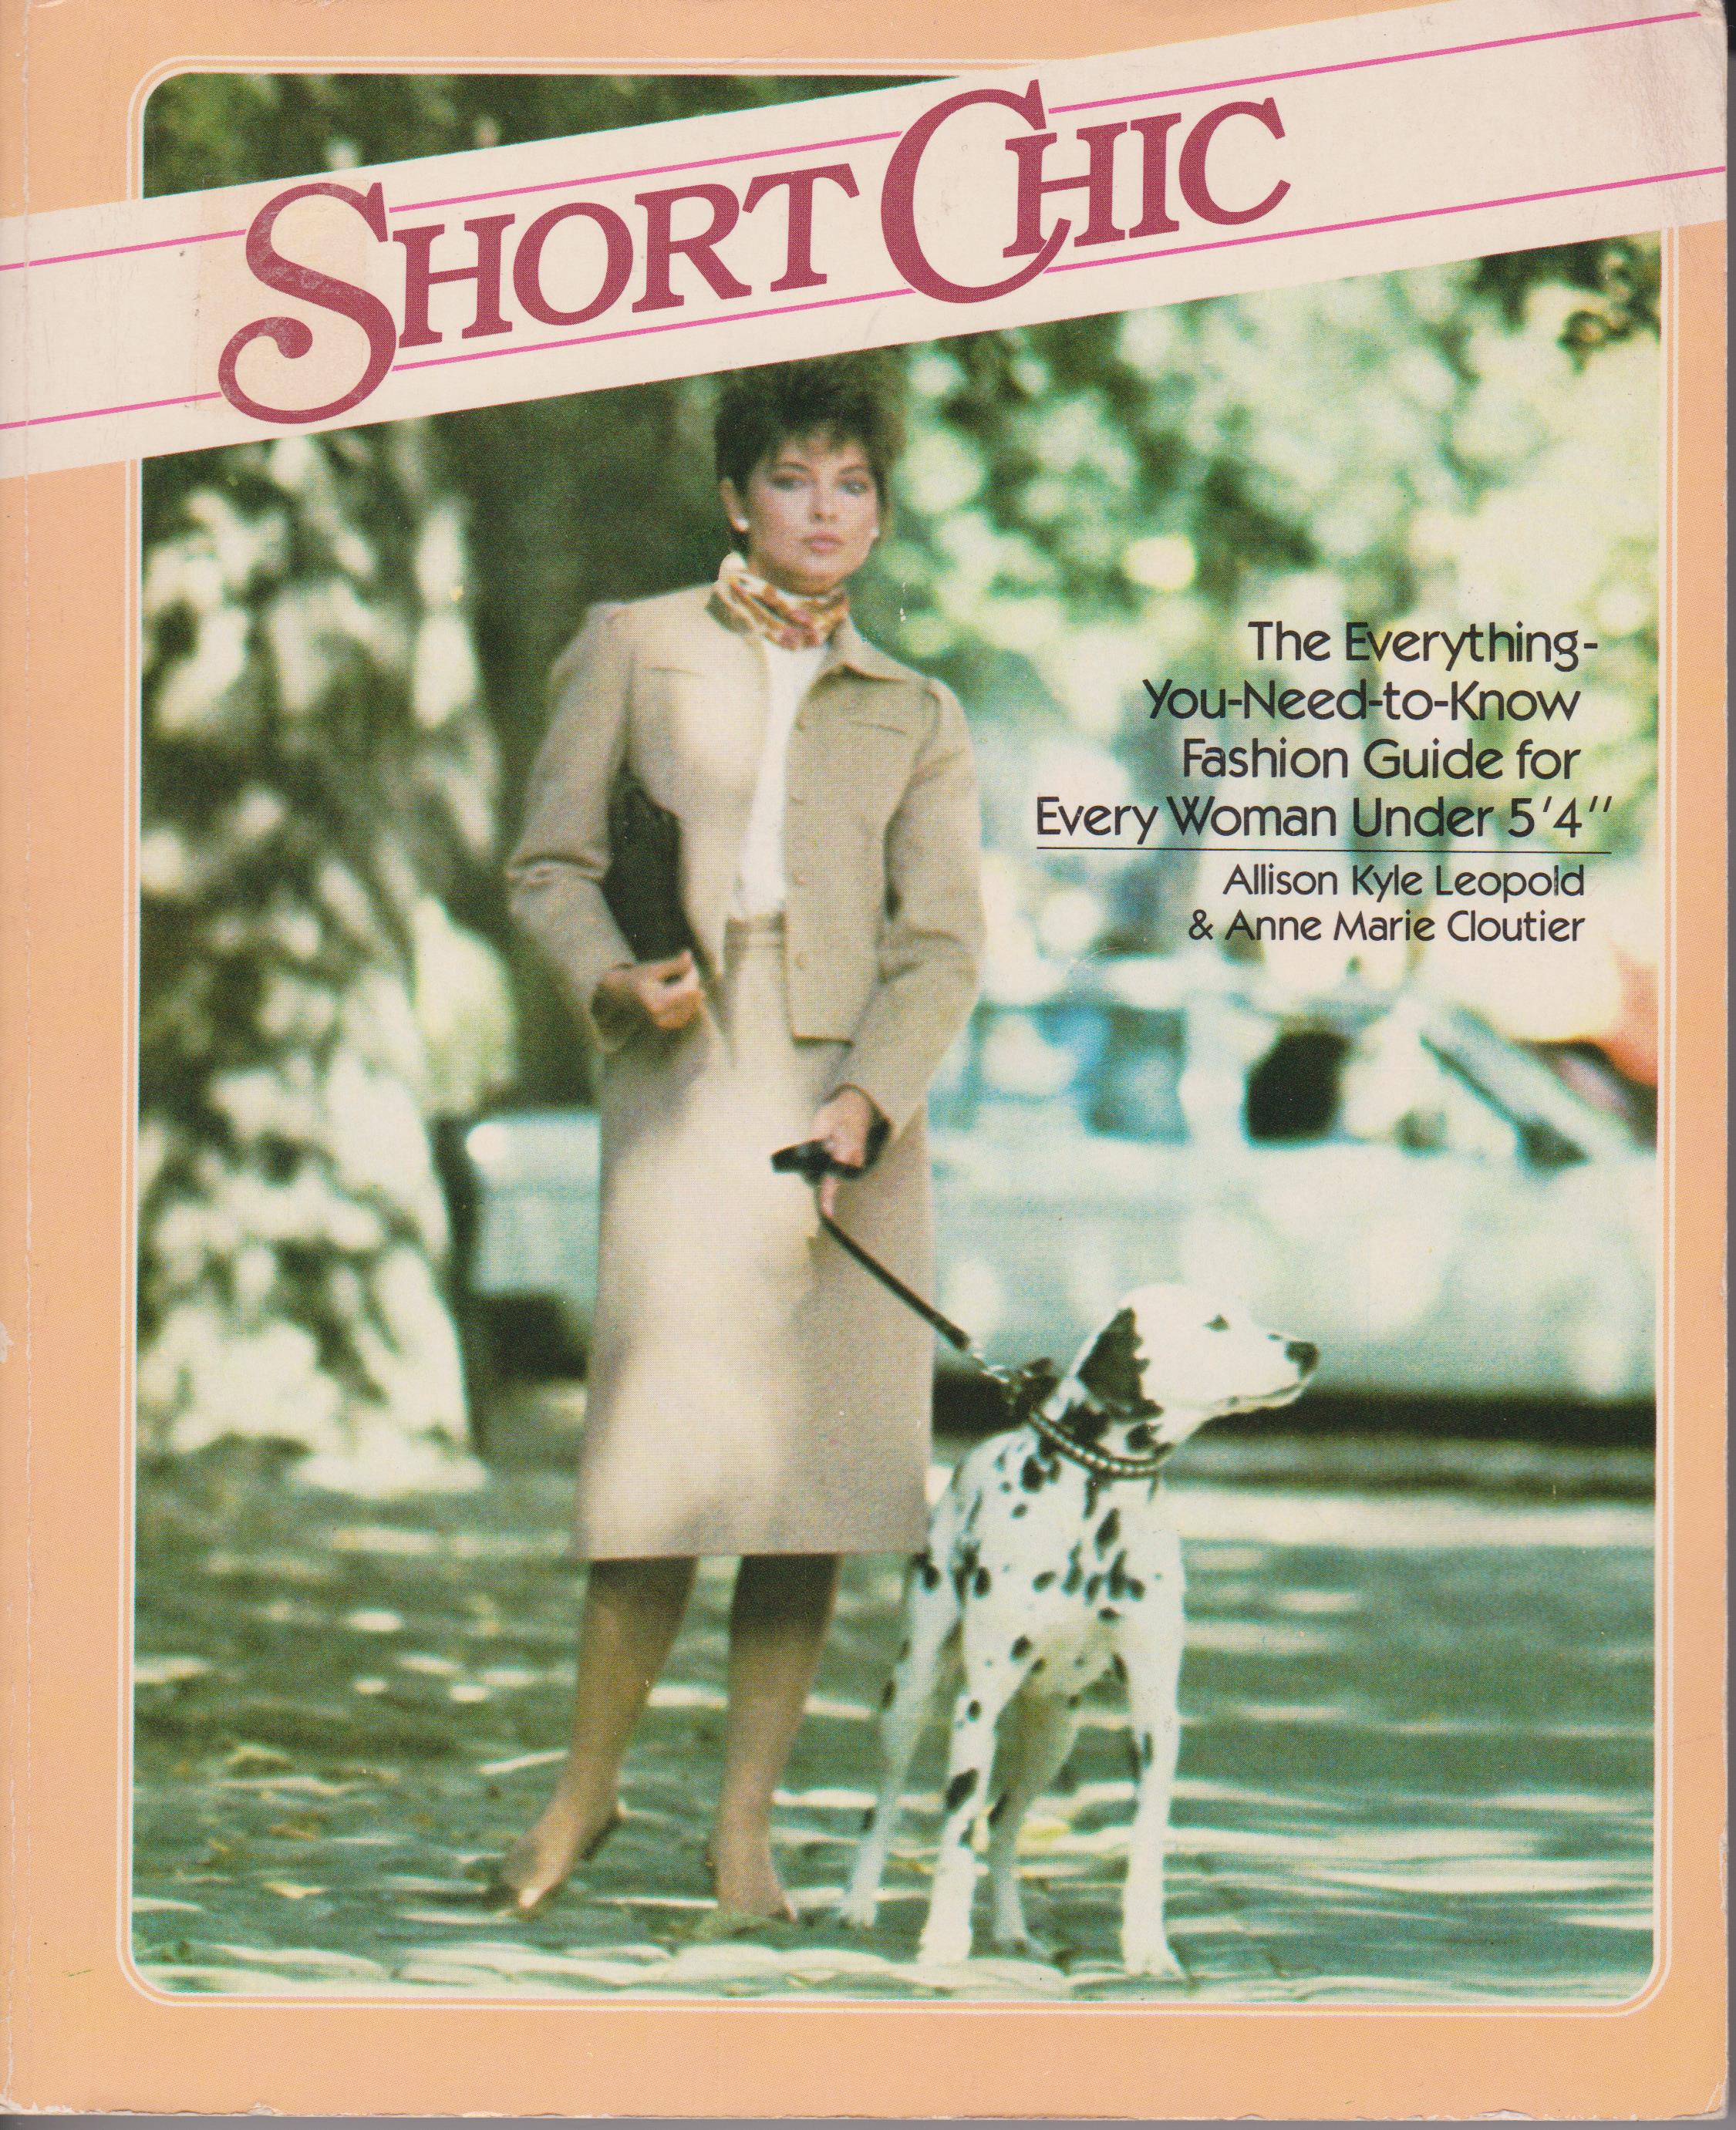 Short Chic - The Everything-You-Need-to-Know Fashion Guide for Every Woman  Under 5'4 by Allison Kyle Leopold & Anne Marie Cloutier: good paperback ( 1981)